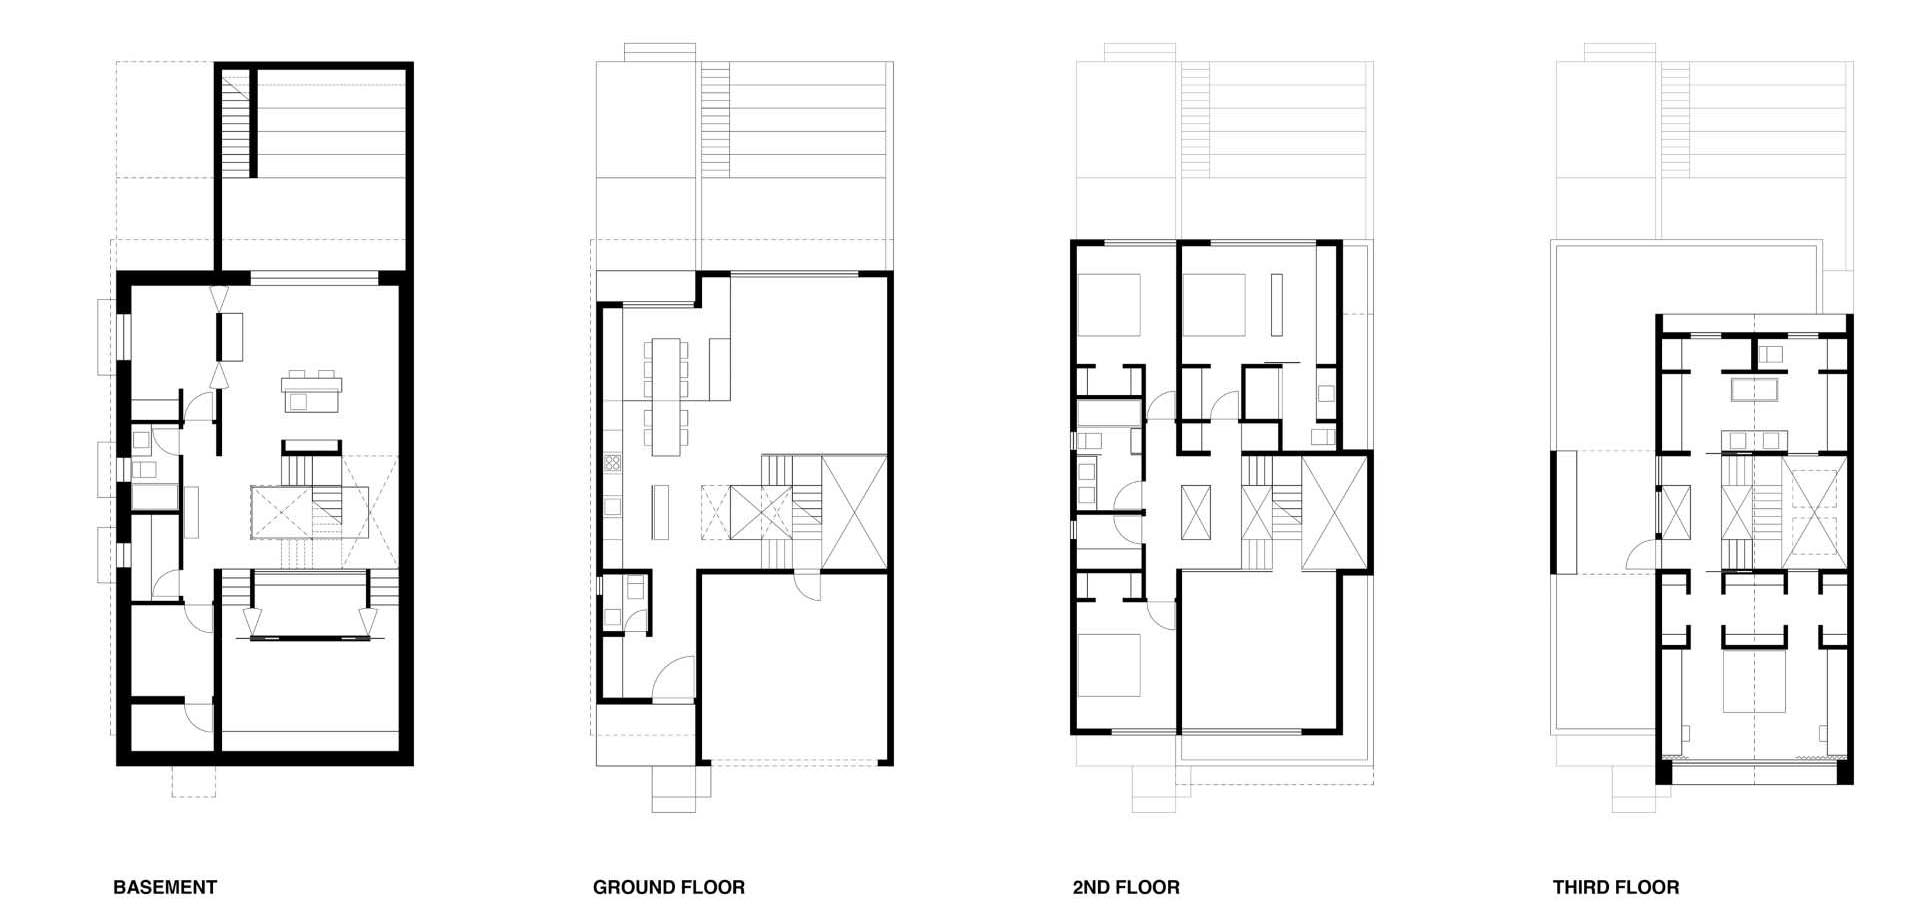 The floor plan of a modern house with four levels.